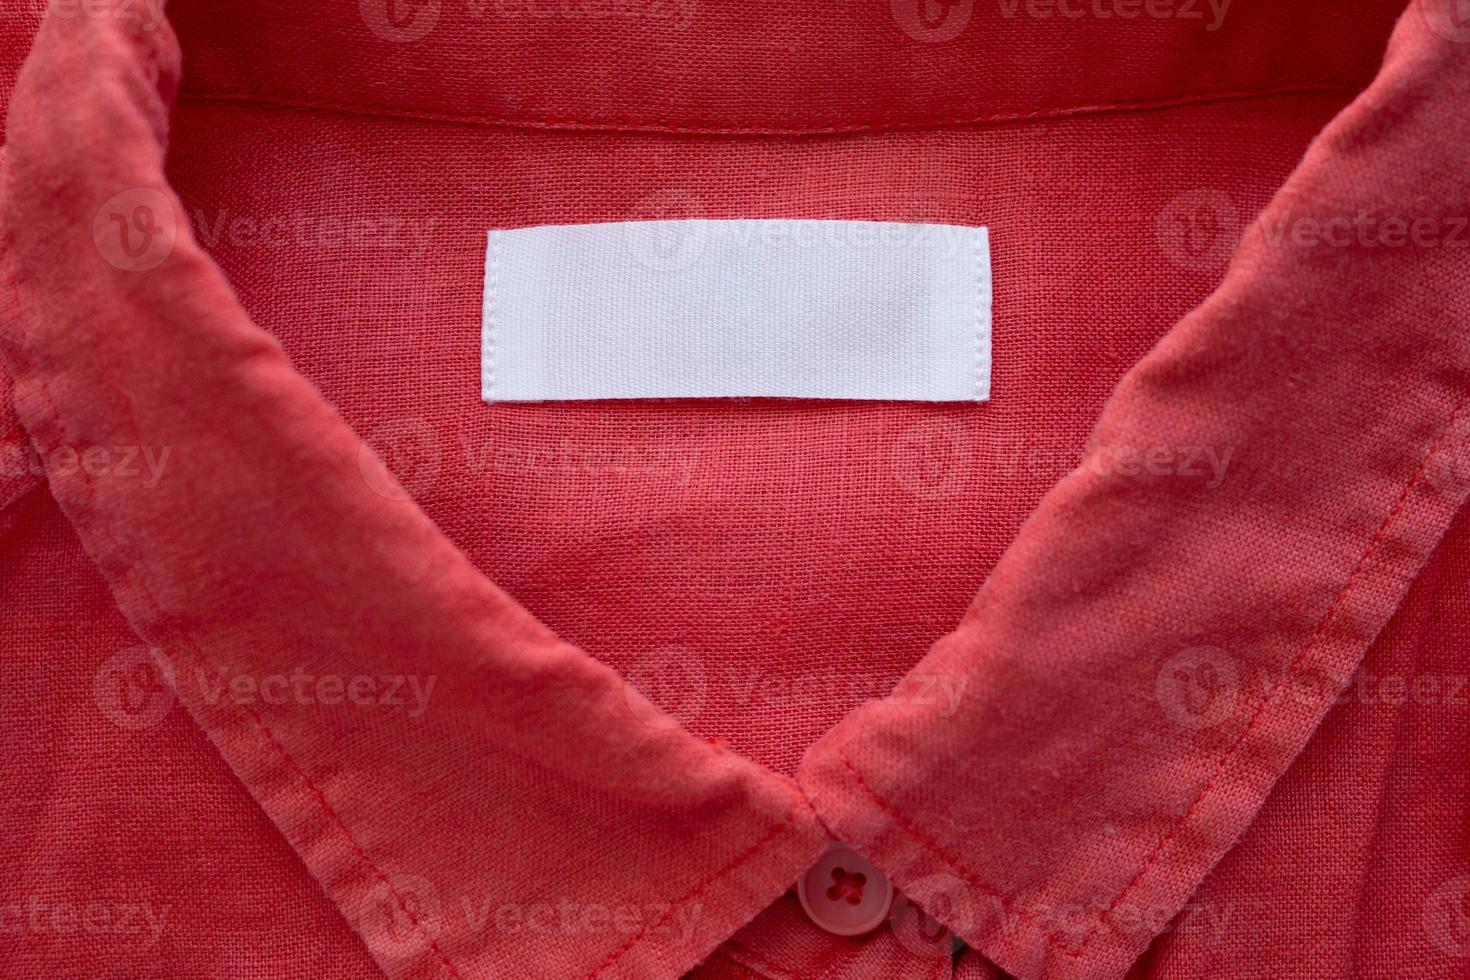 White blank clothing tag label on red linen shirt fabric texture background photo